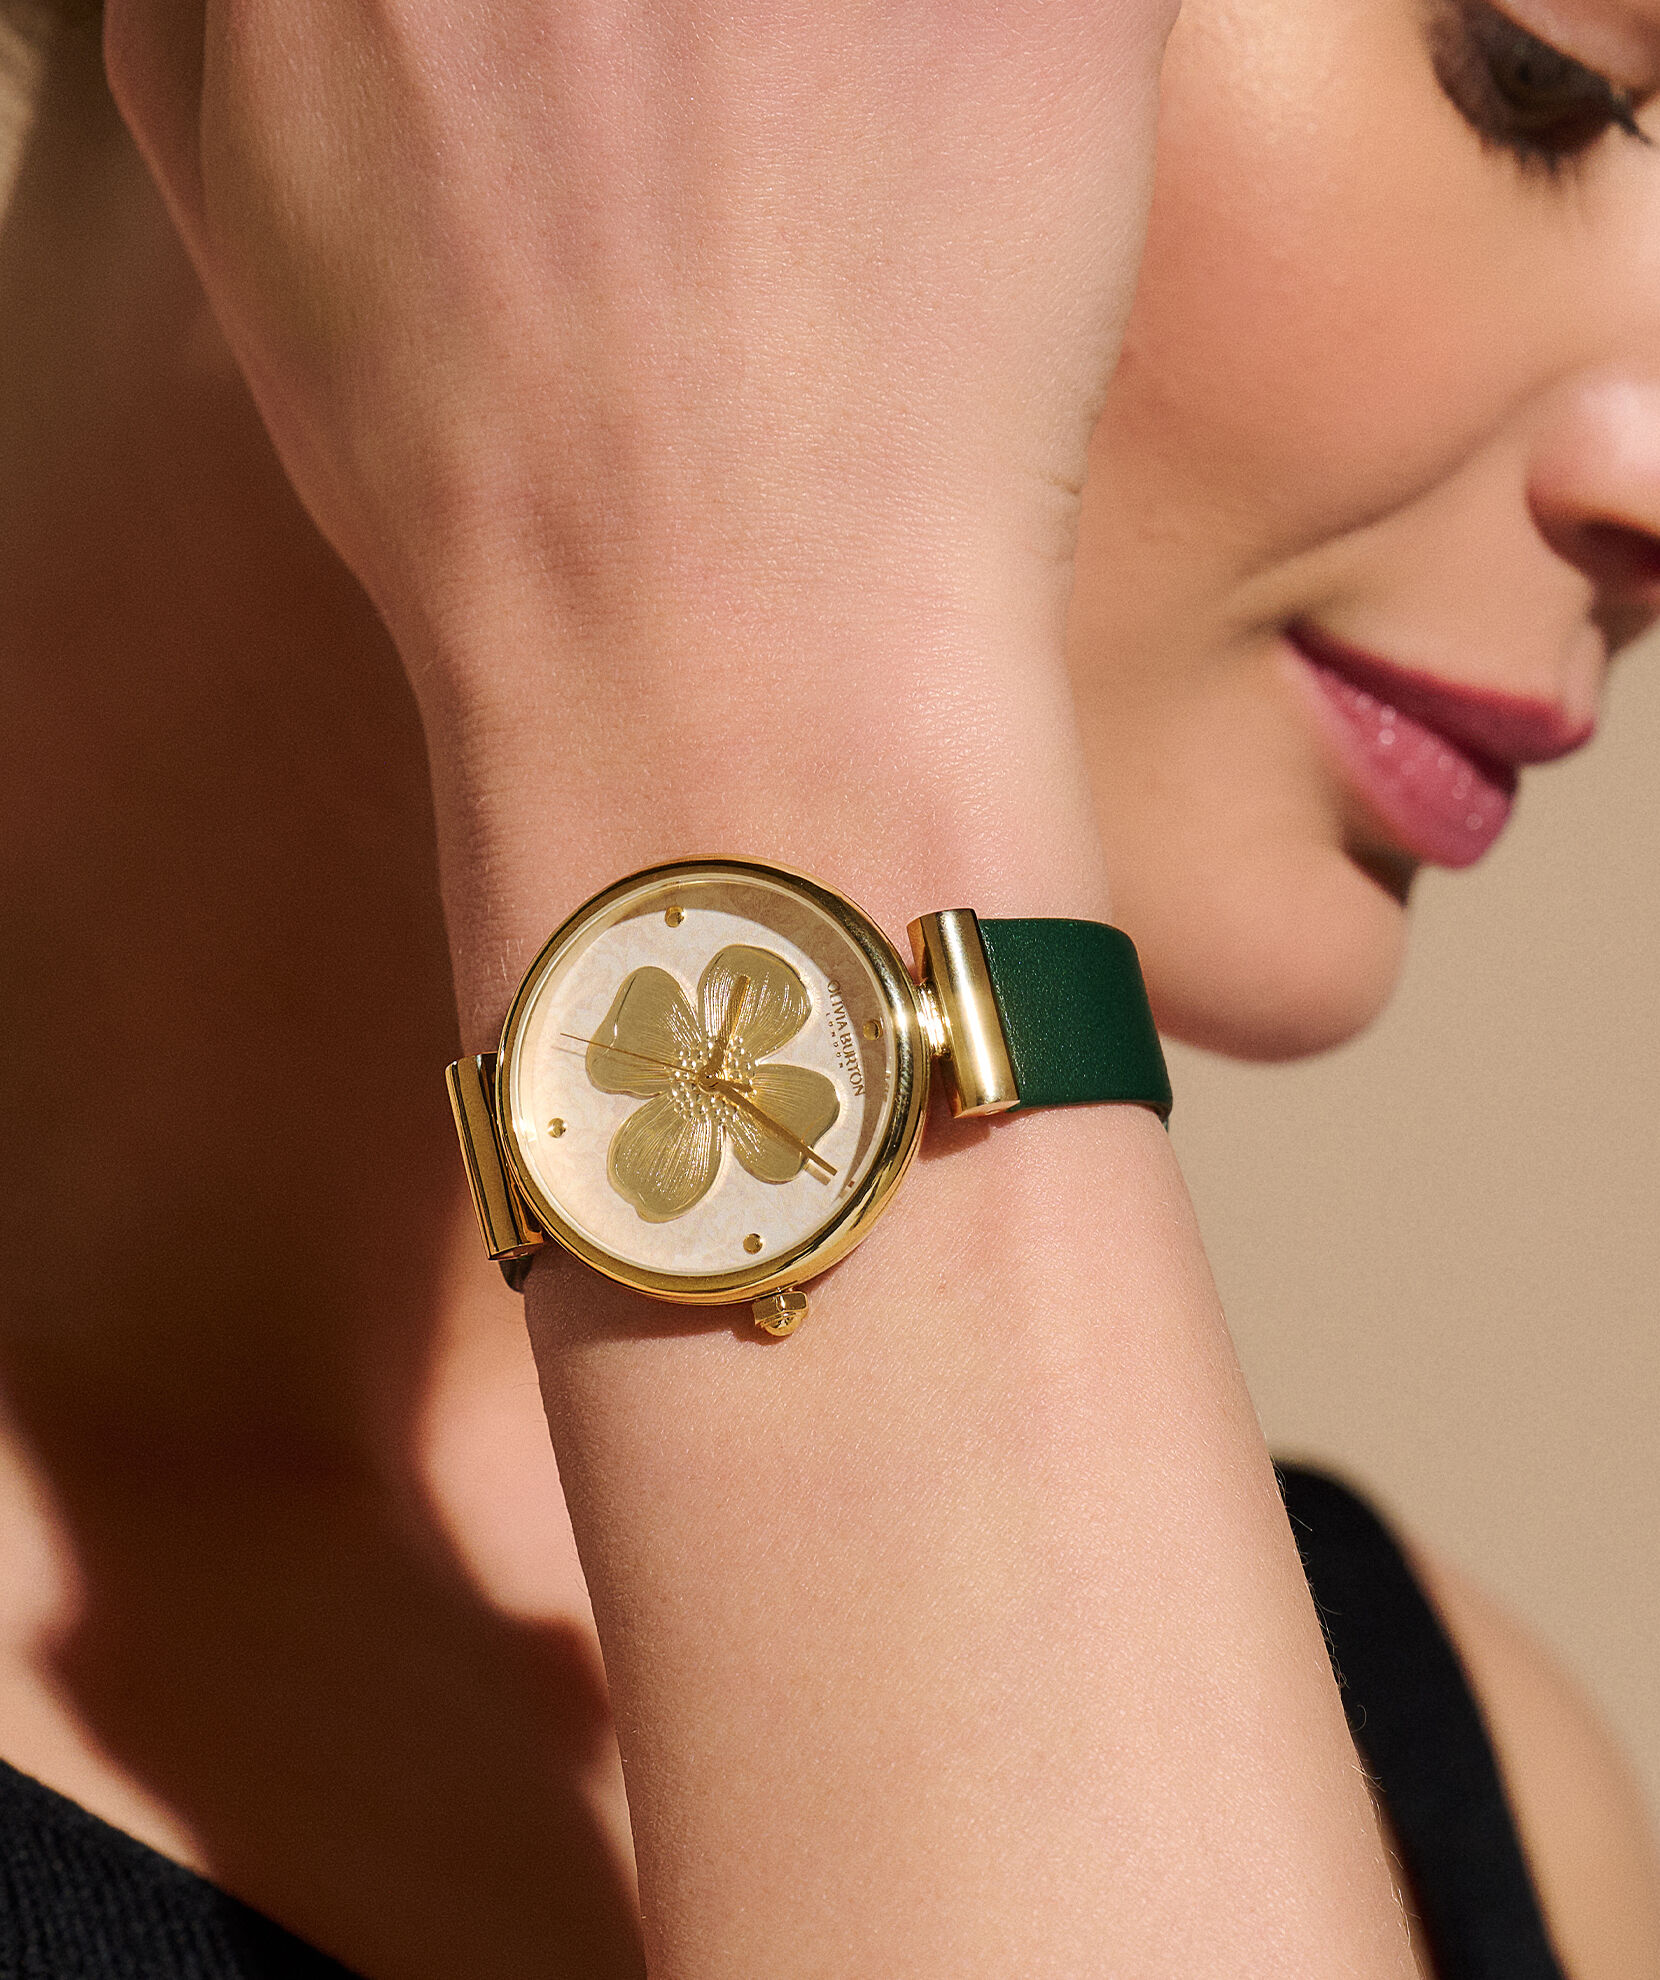 SPGBK Watches: Designer Watches Inspired by Education, Community, & Culture